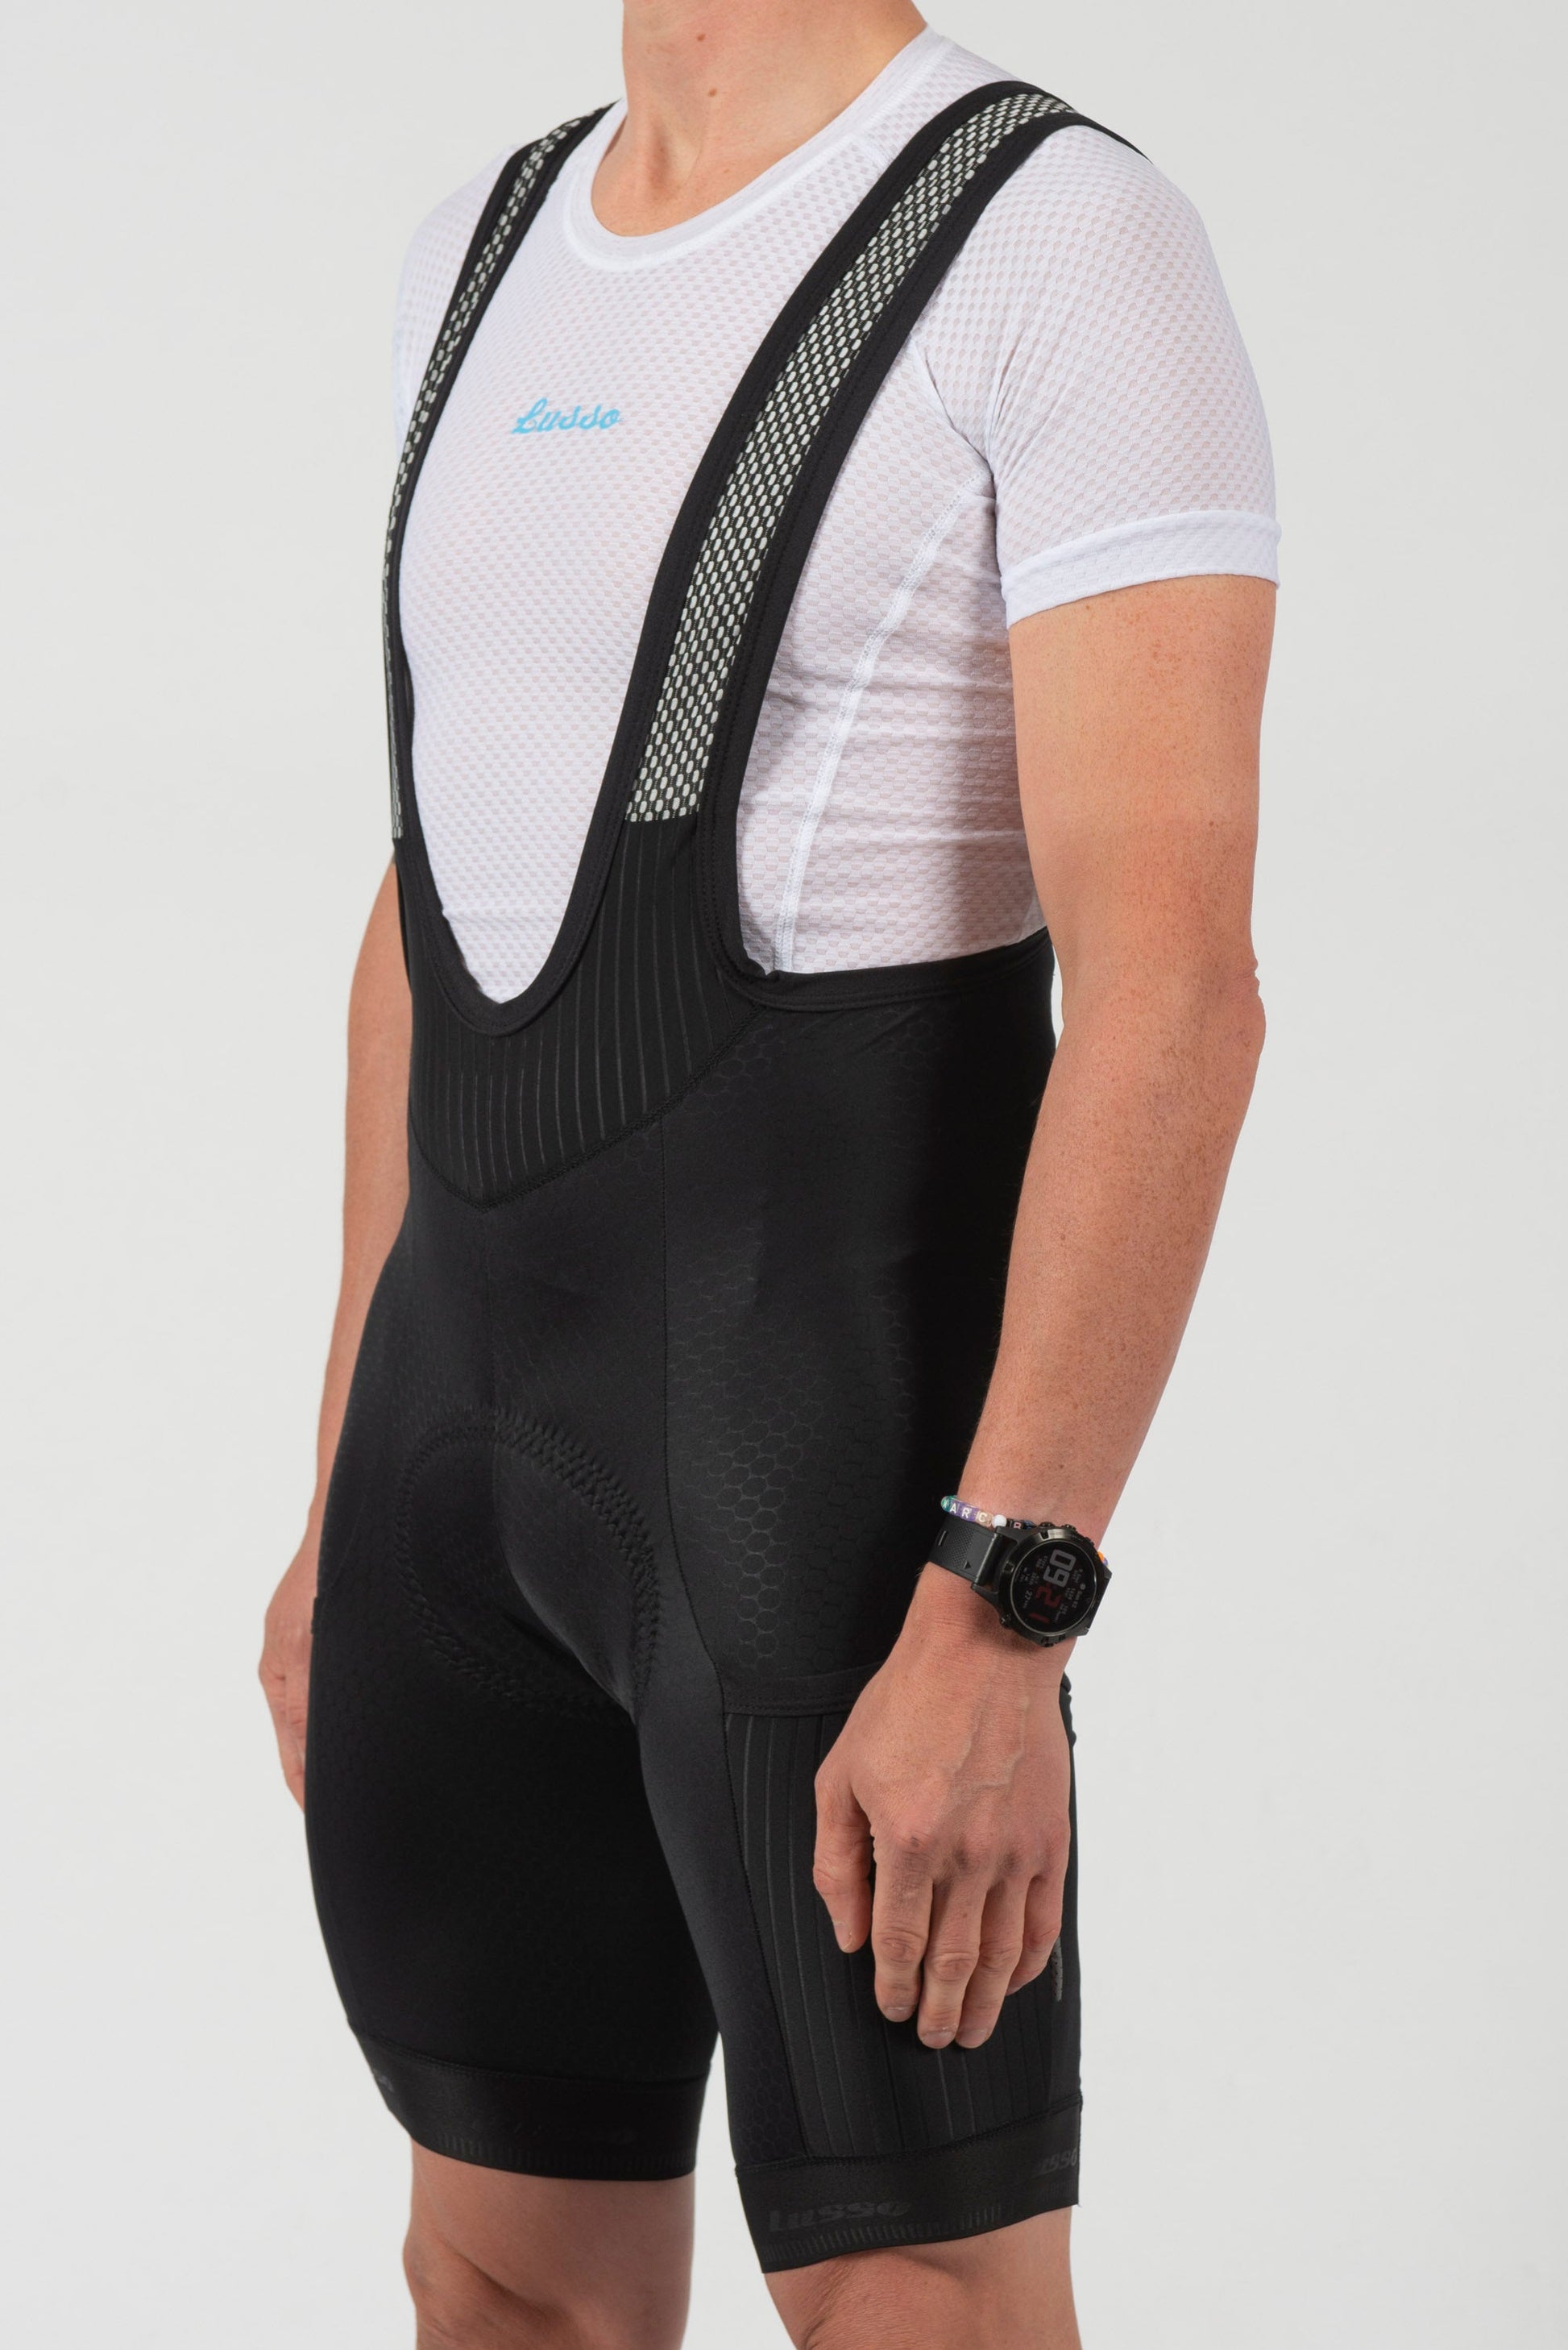 Adventure Thermal Bibshorts - Lusso Cycle Wear